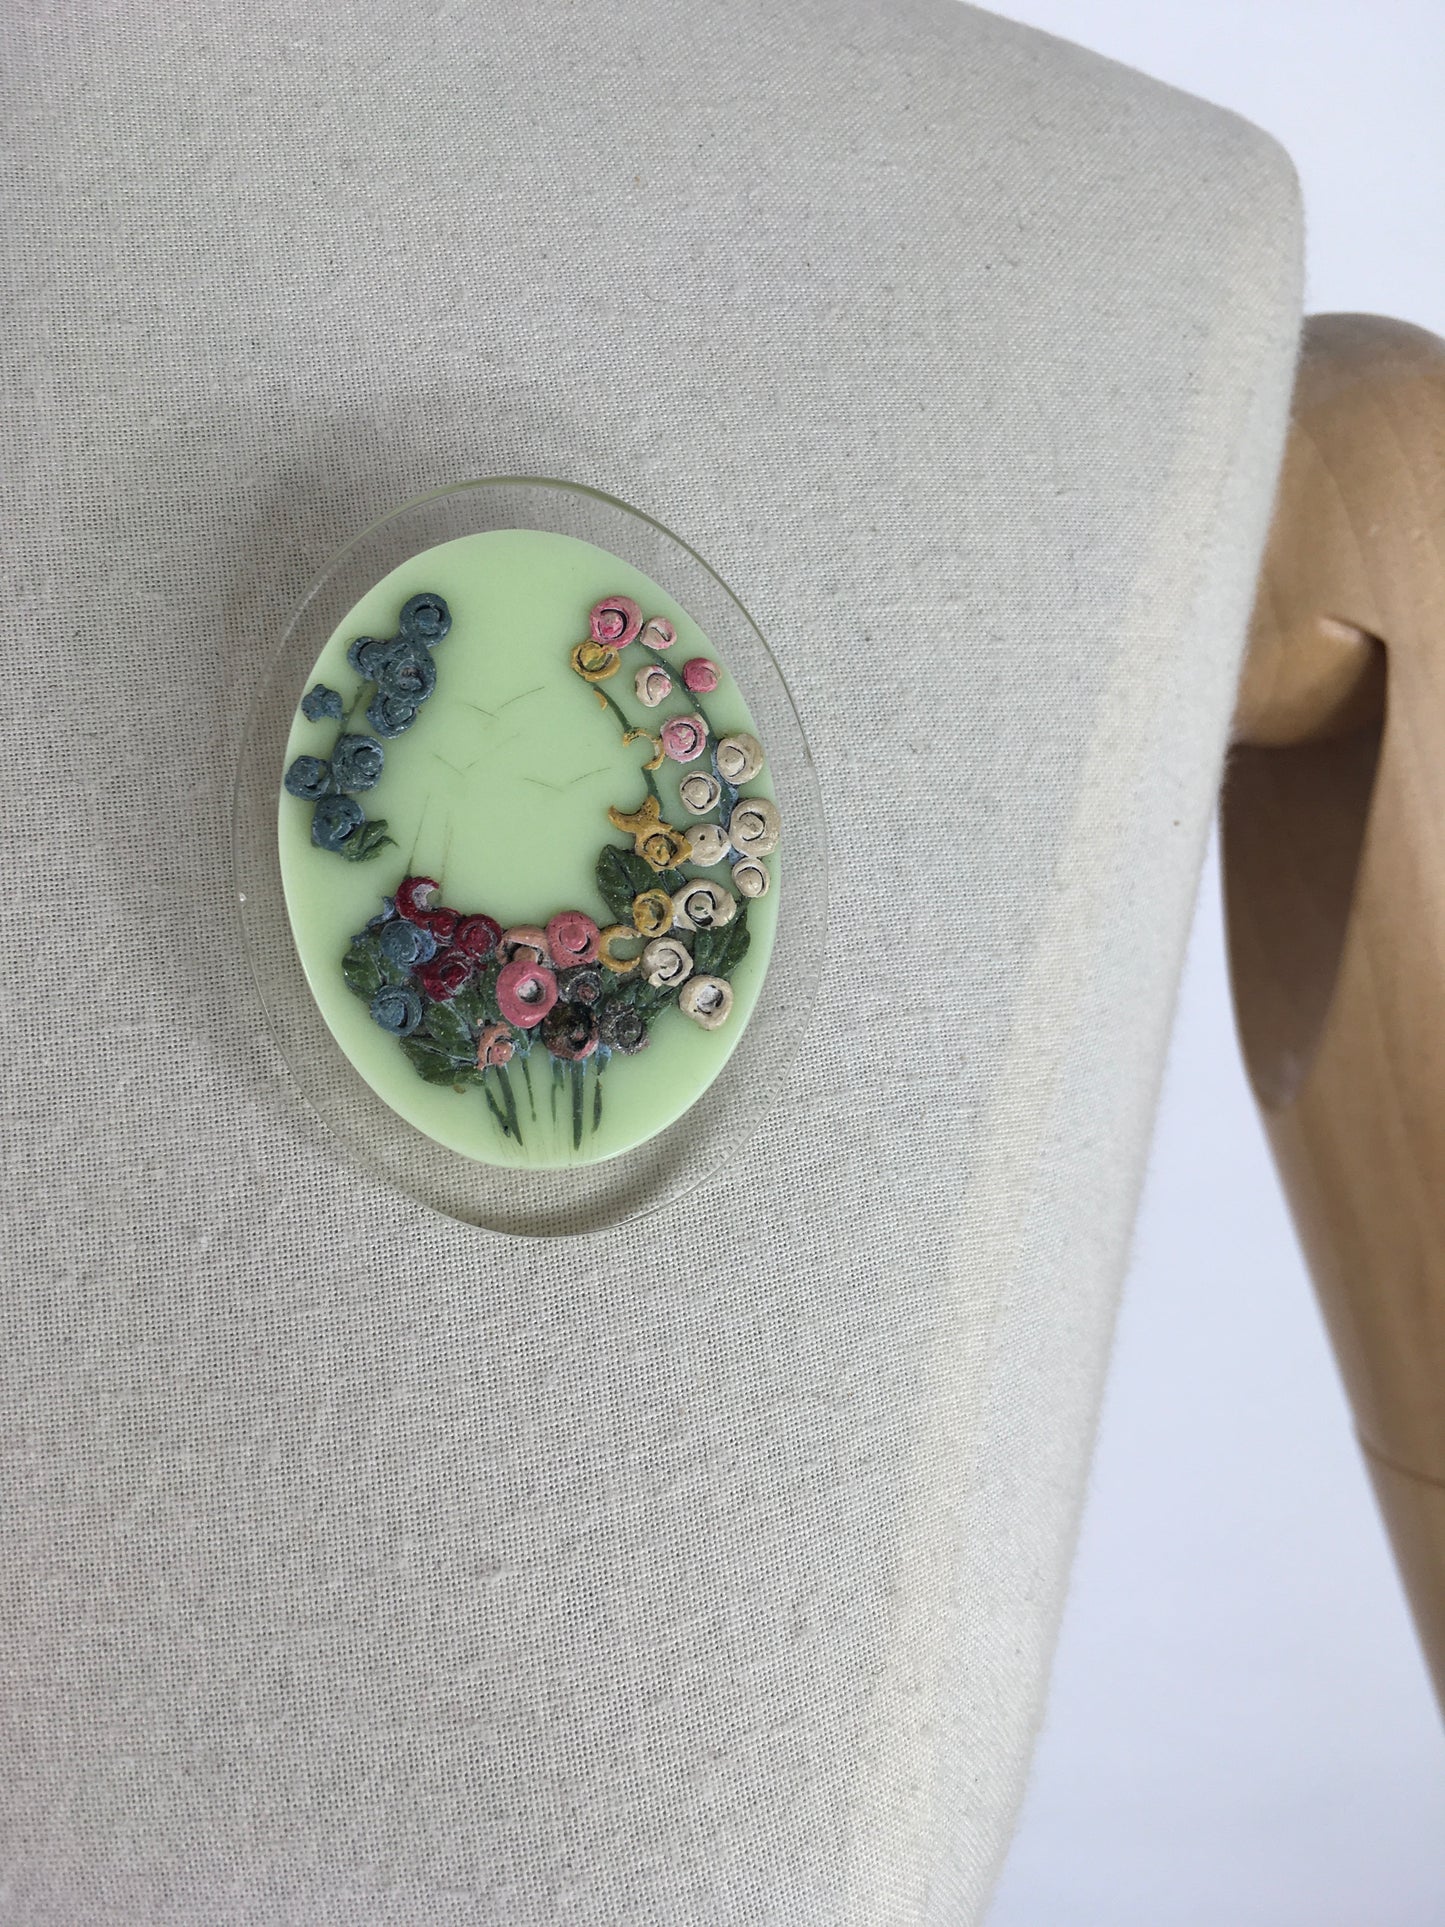 Original 1940’s Double Layered Lucite Brooch - With Handpainted Pastel Floral Details